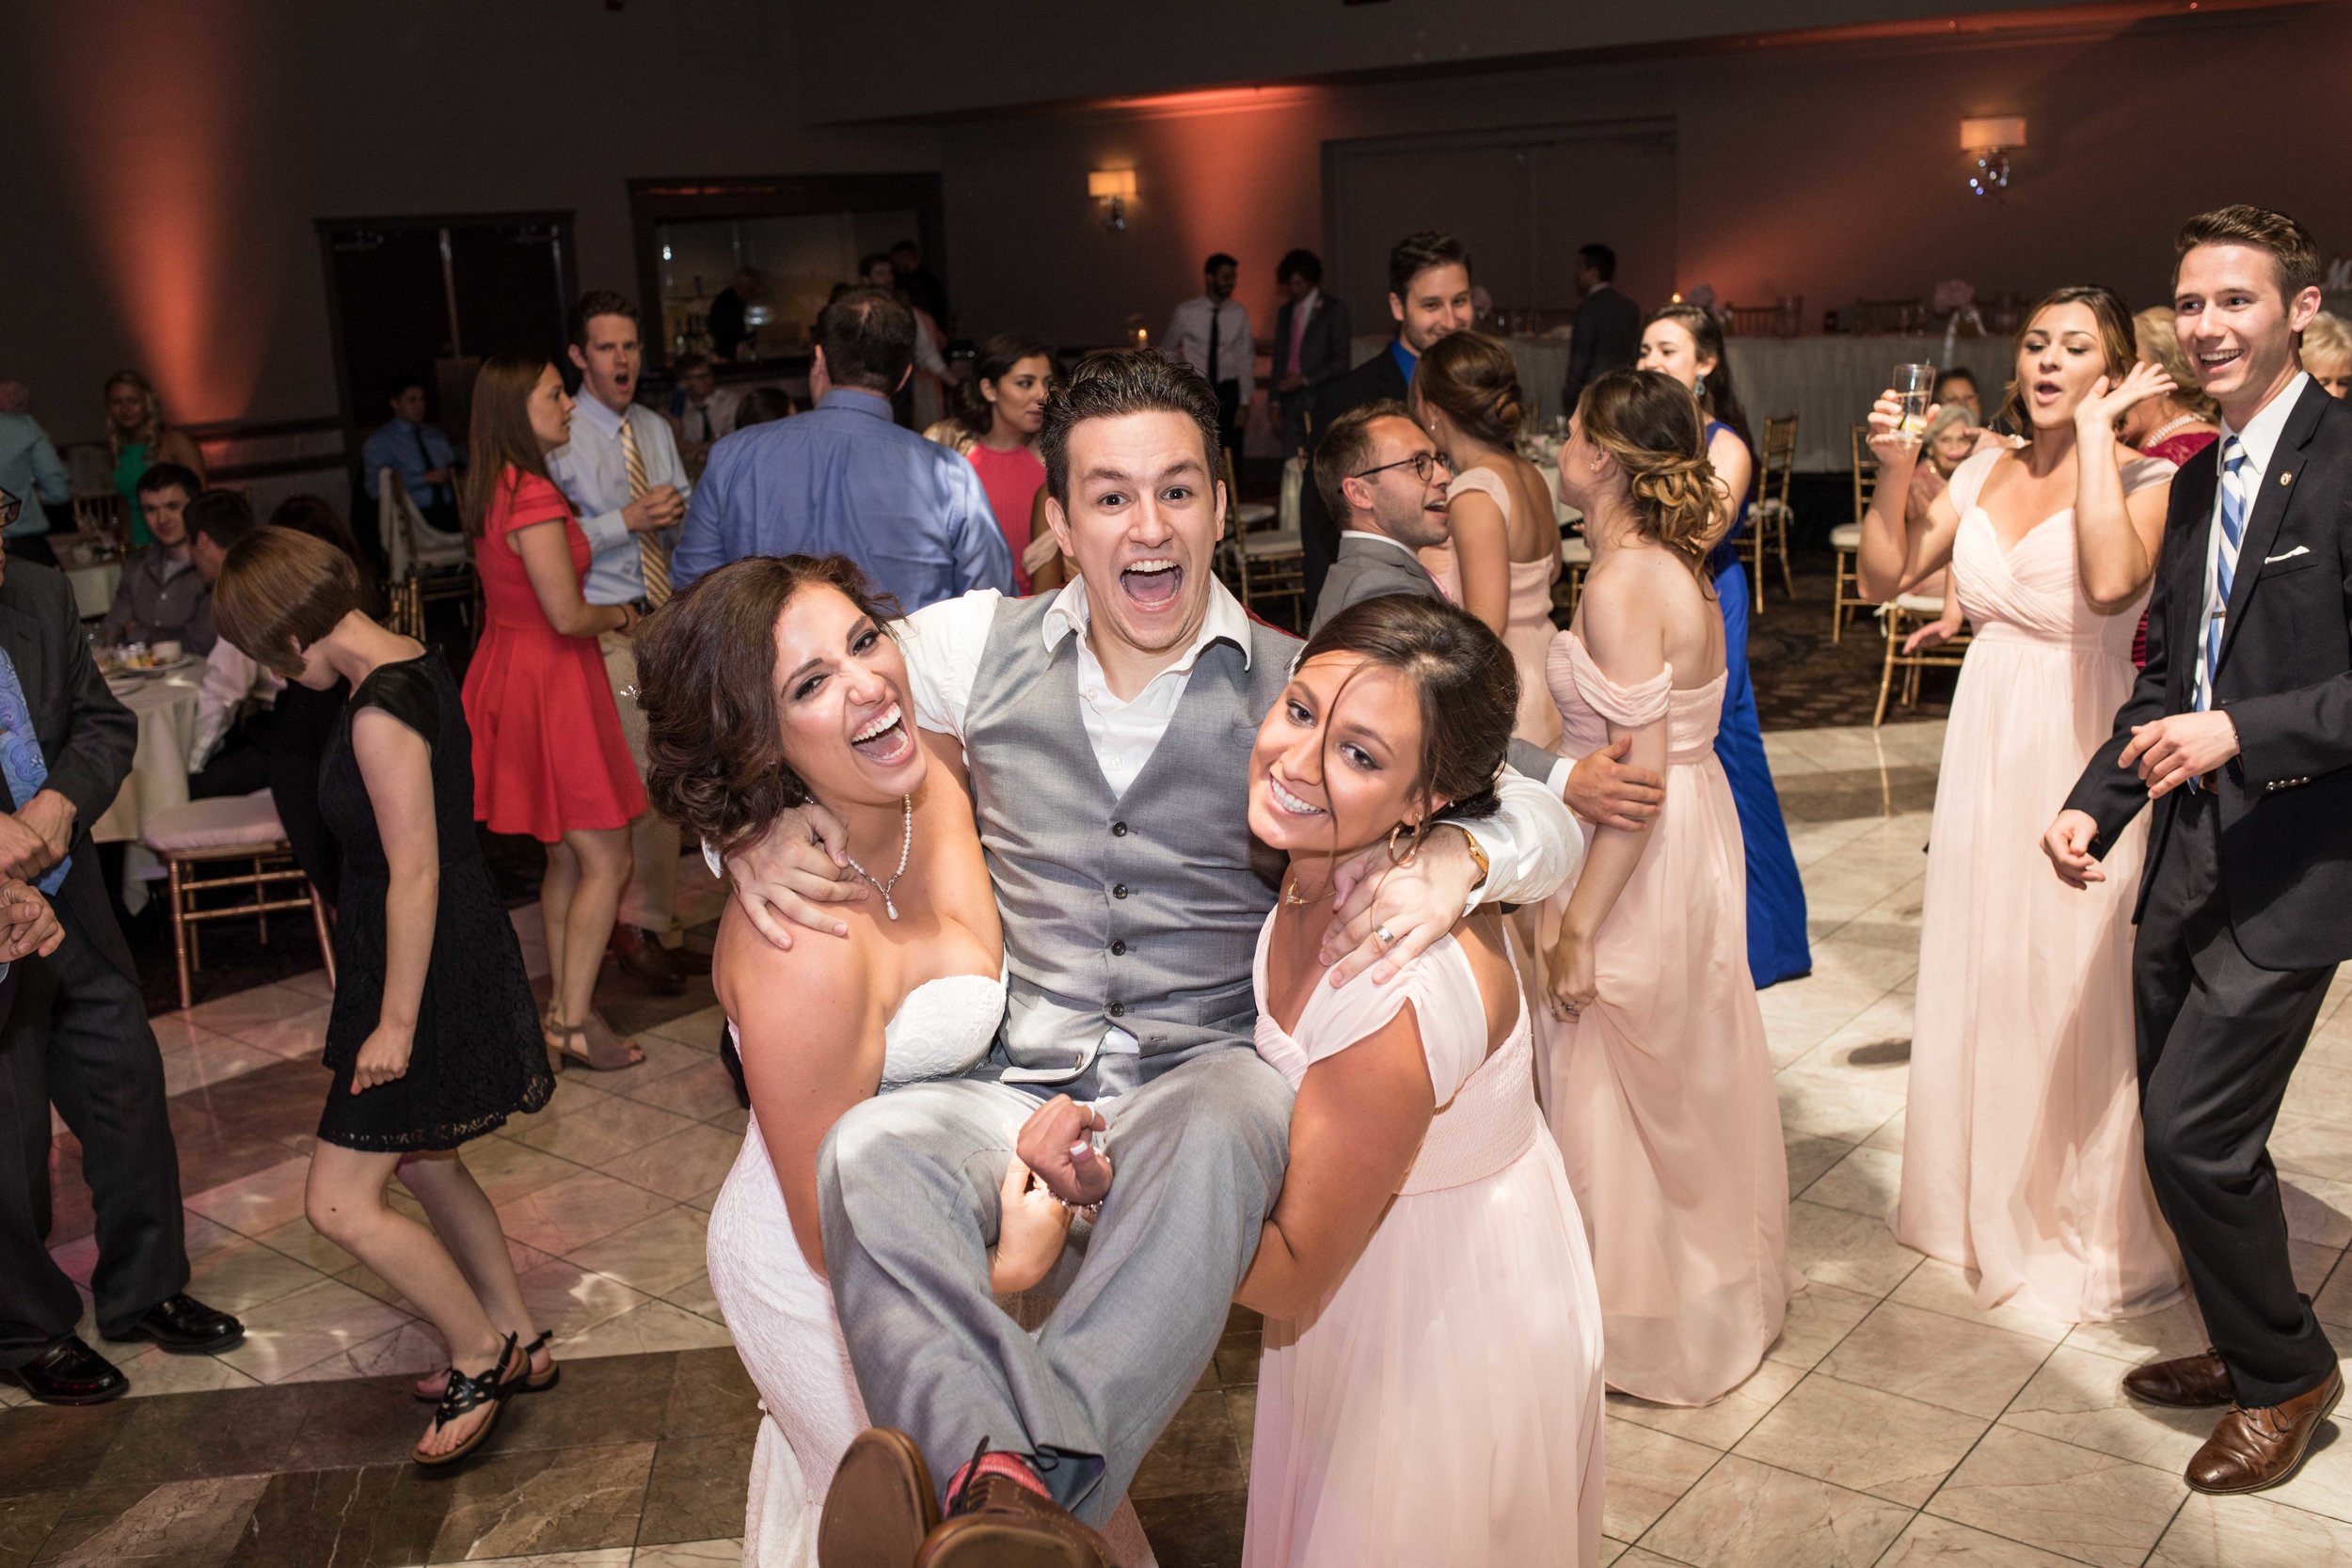  Bride and bridesmaid holding groom on the dance floor all laughing 